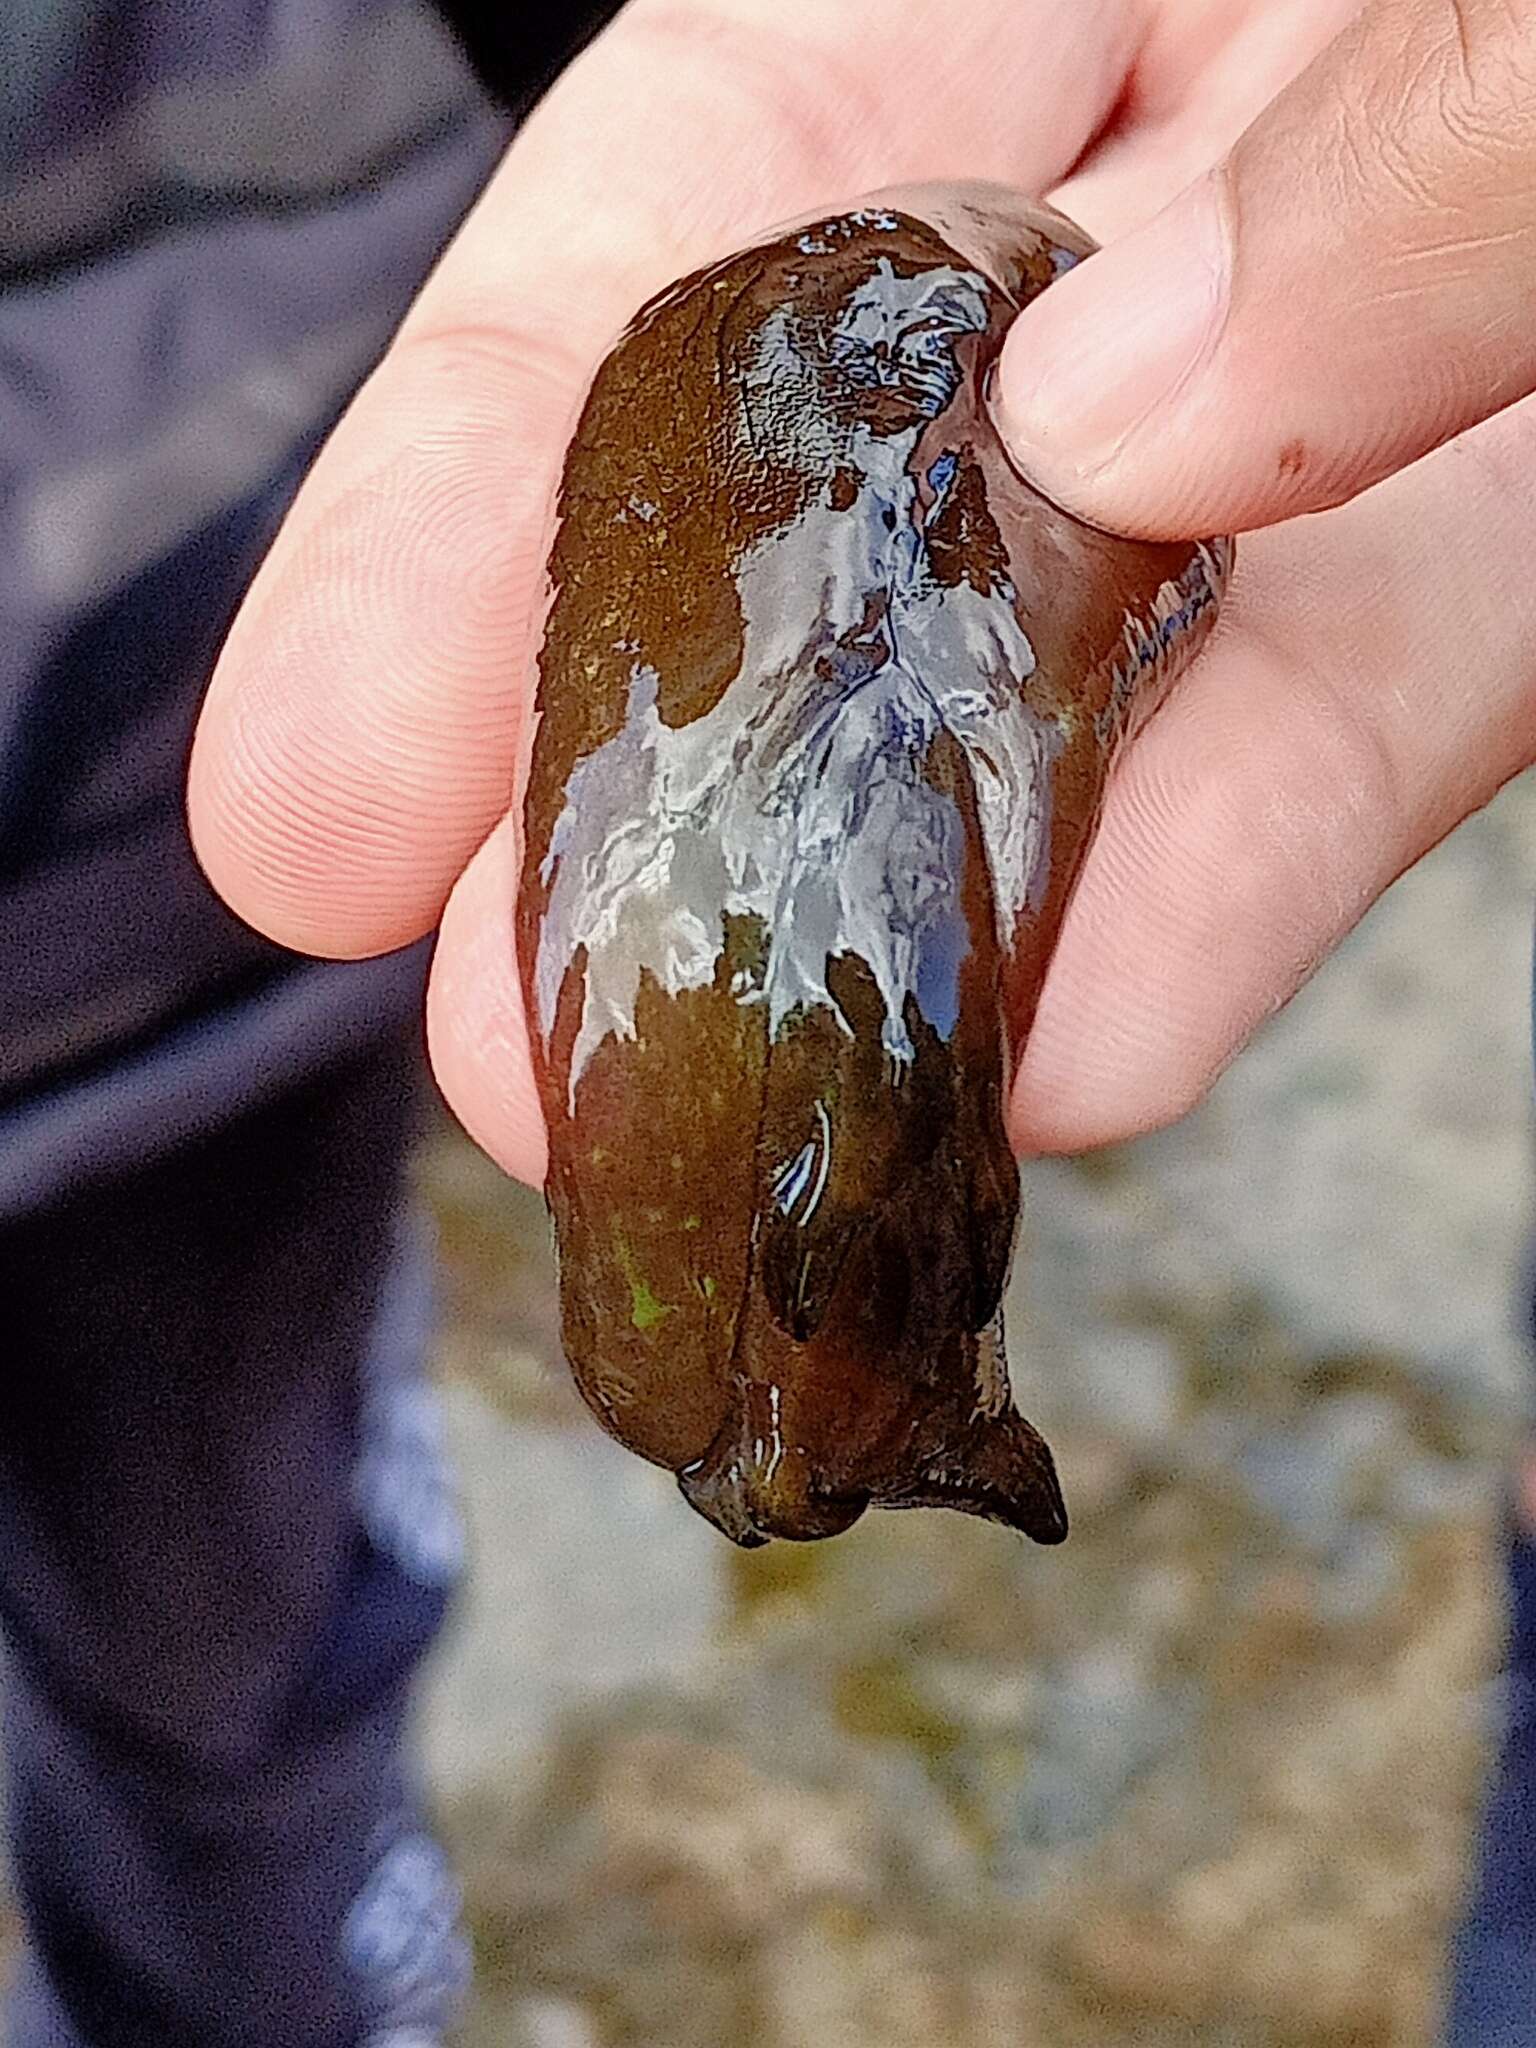 Image of spotted sea hare